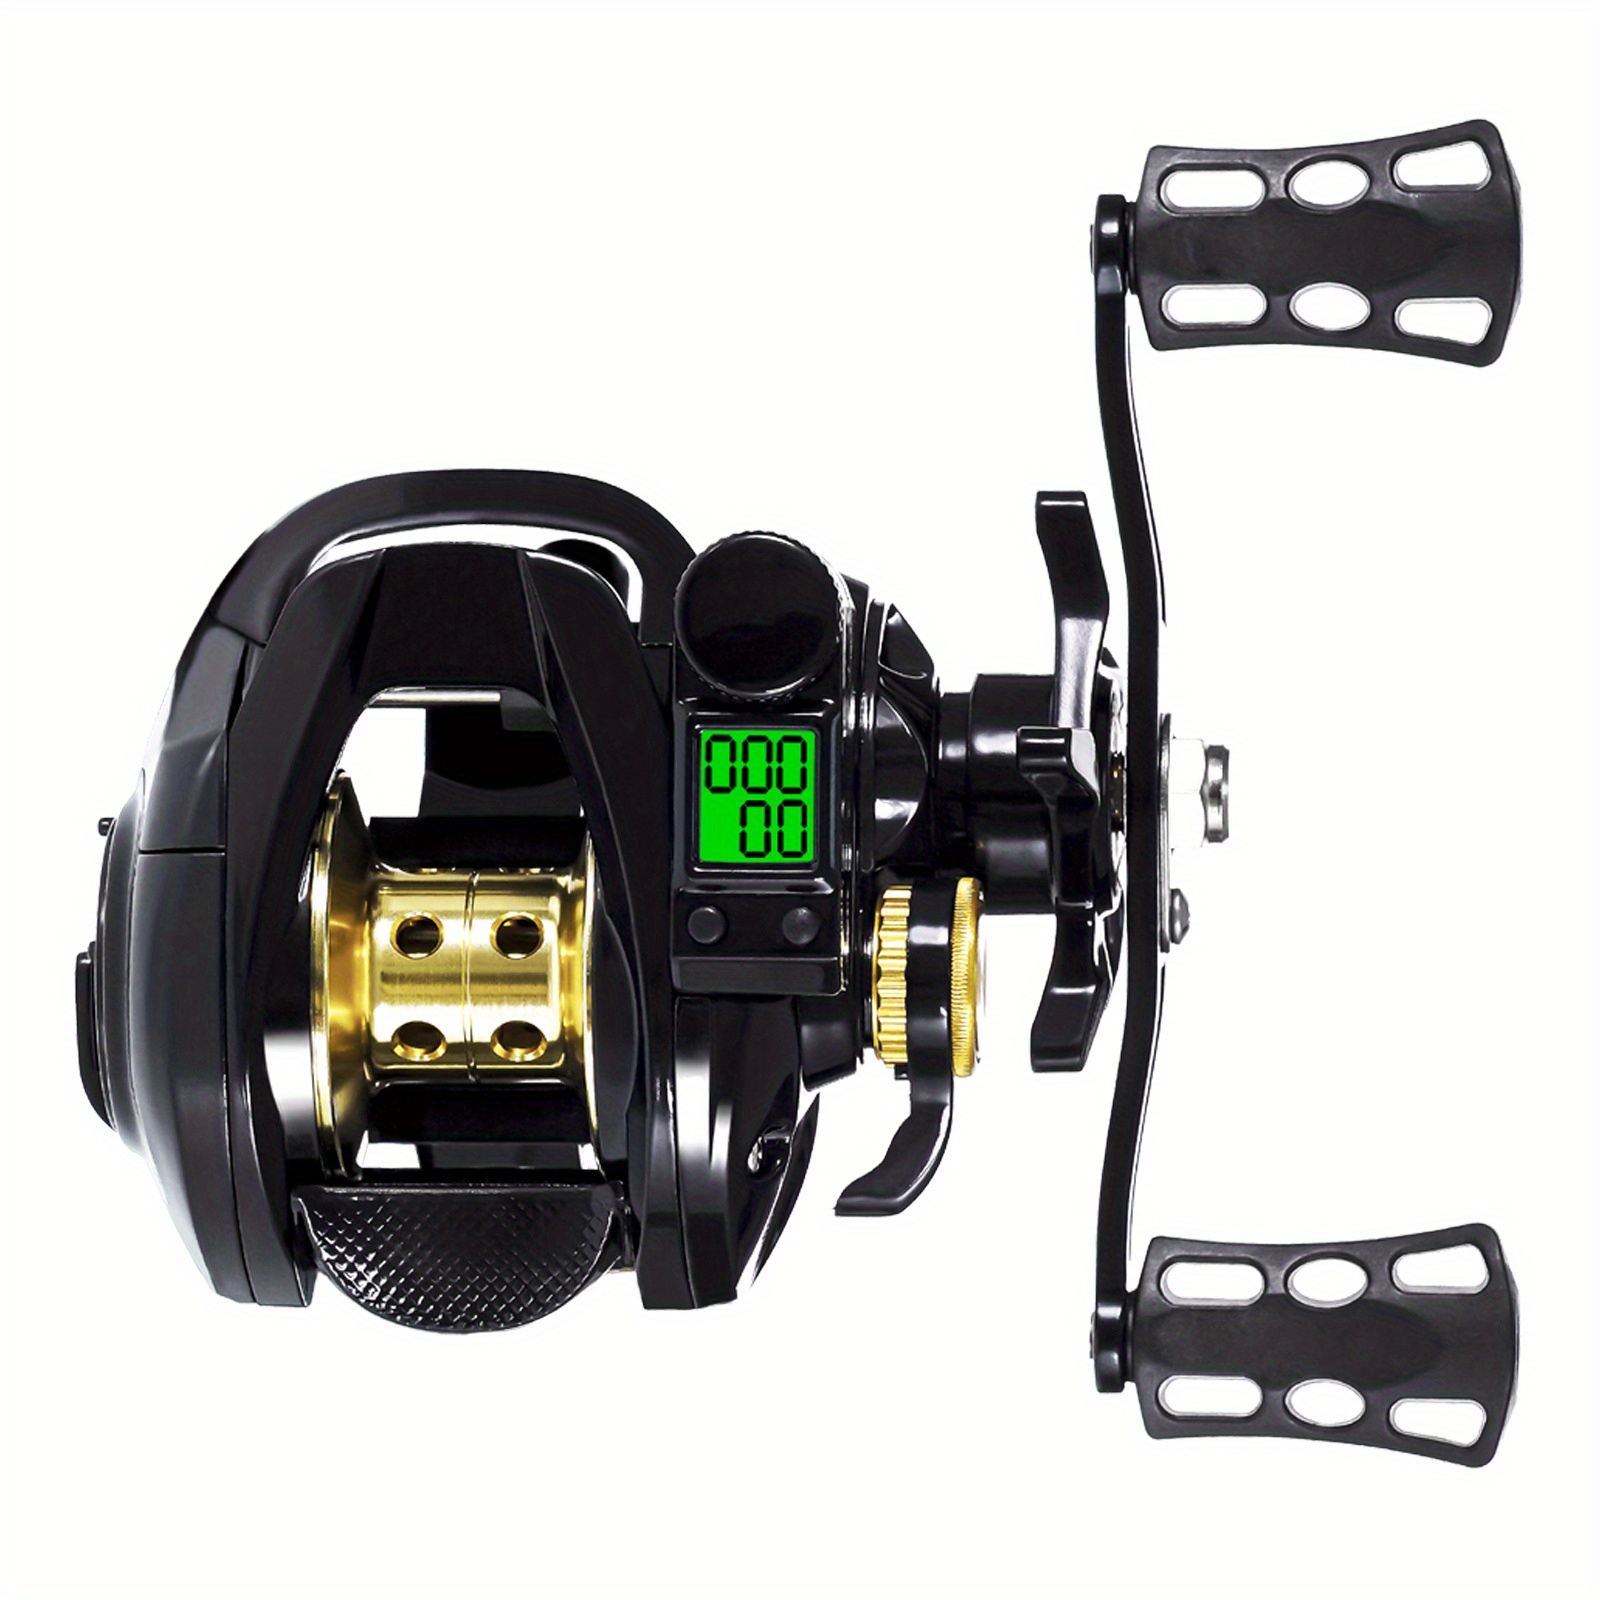 Upgrade Your Fishing Game with This High-Speed, Waterproof LED Screen  Electronic Fishing Reel!